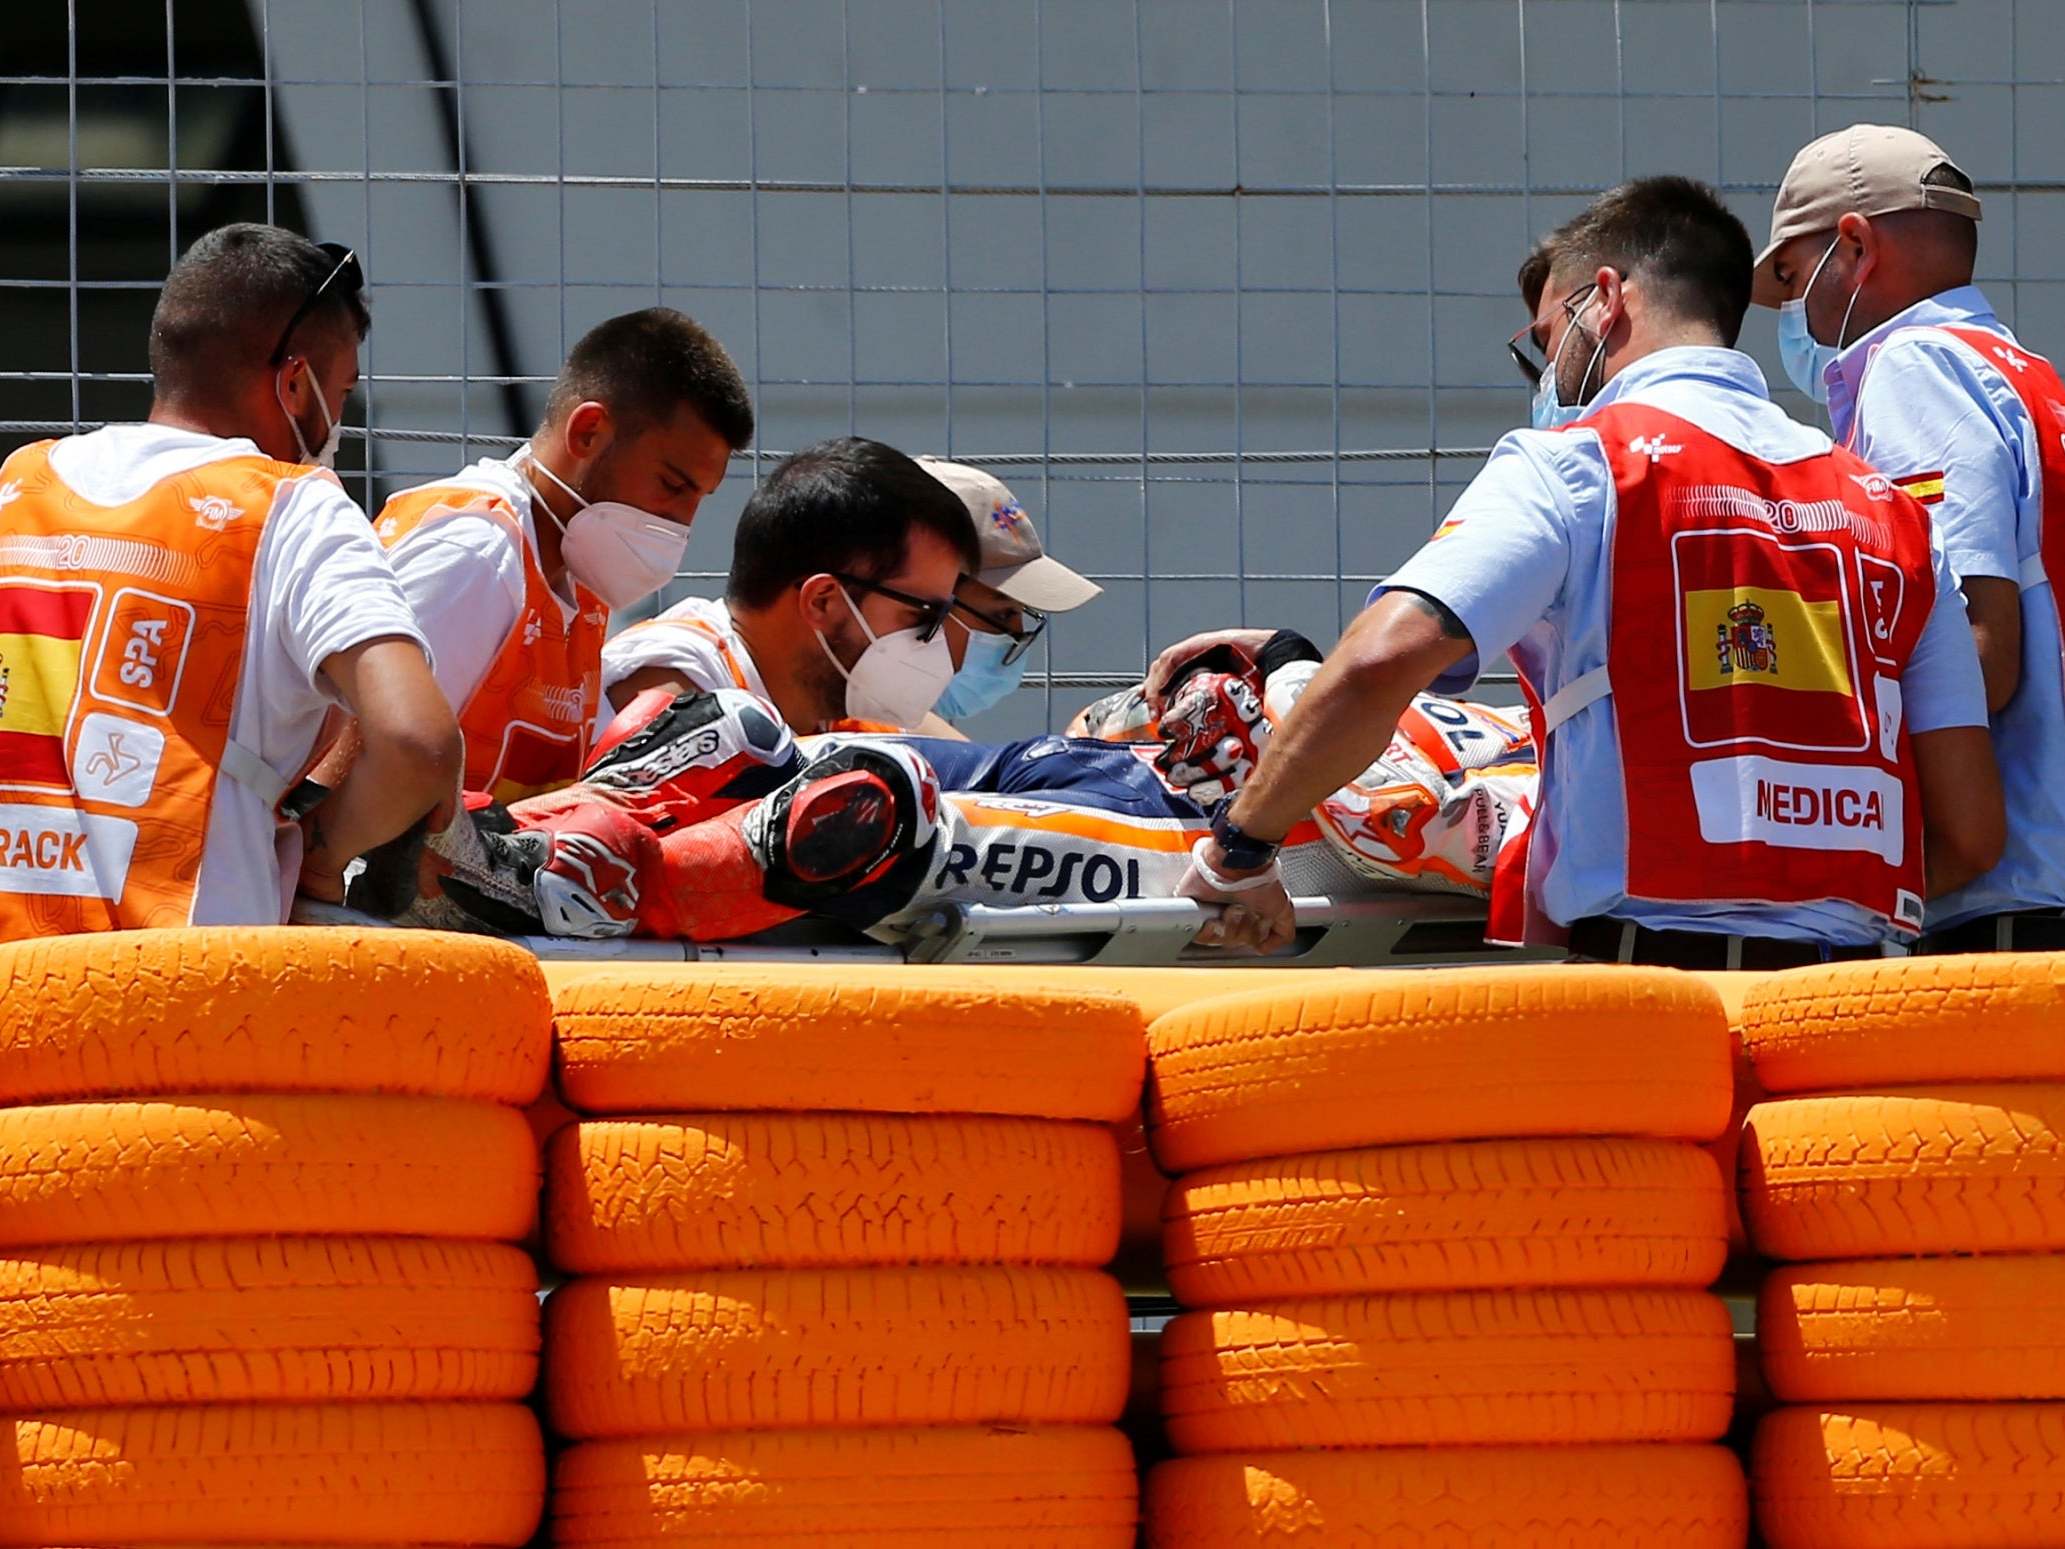 Marquez was carried away on a stretcher after the high-speed accident